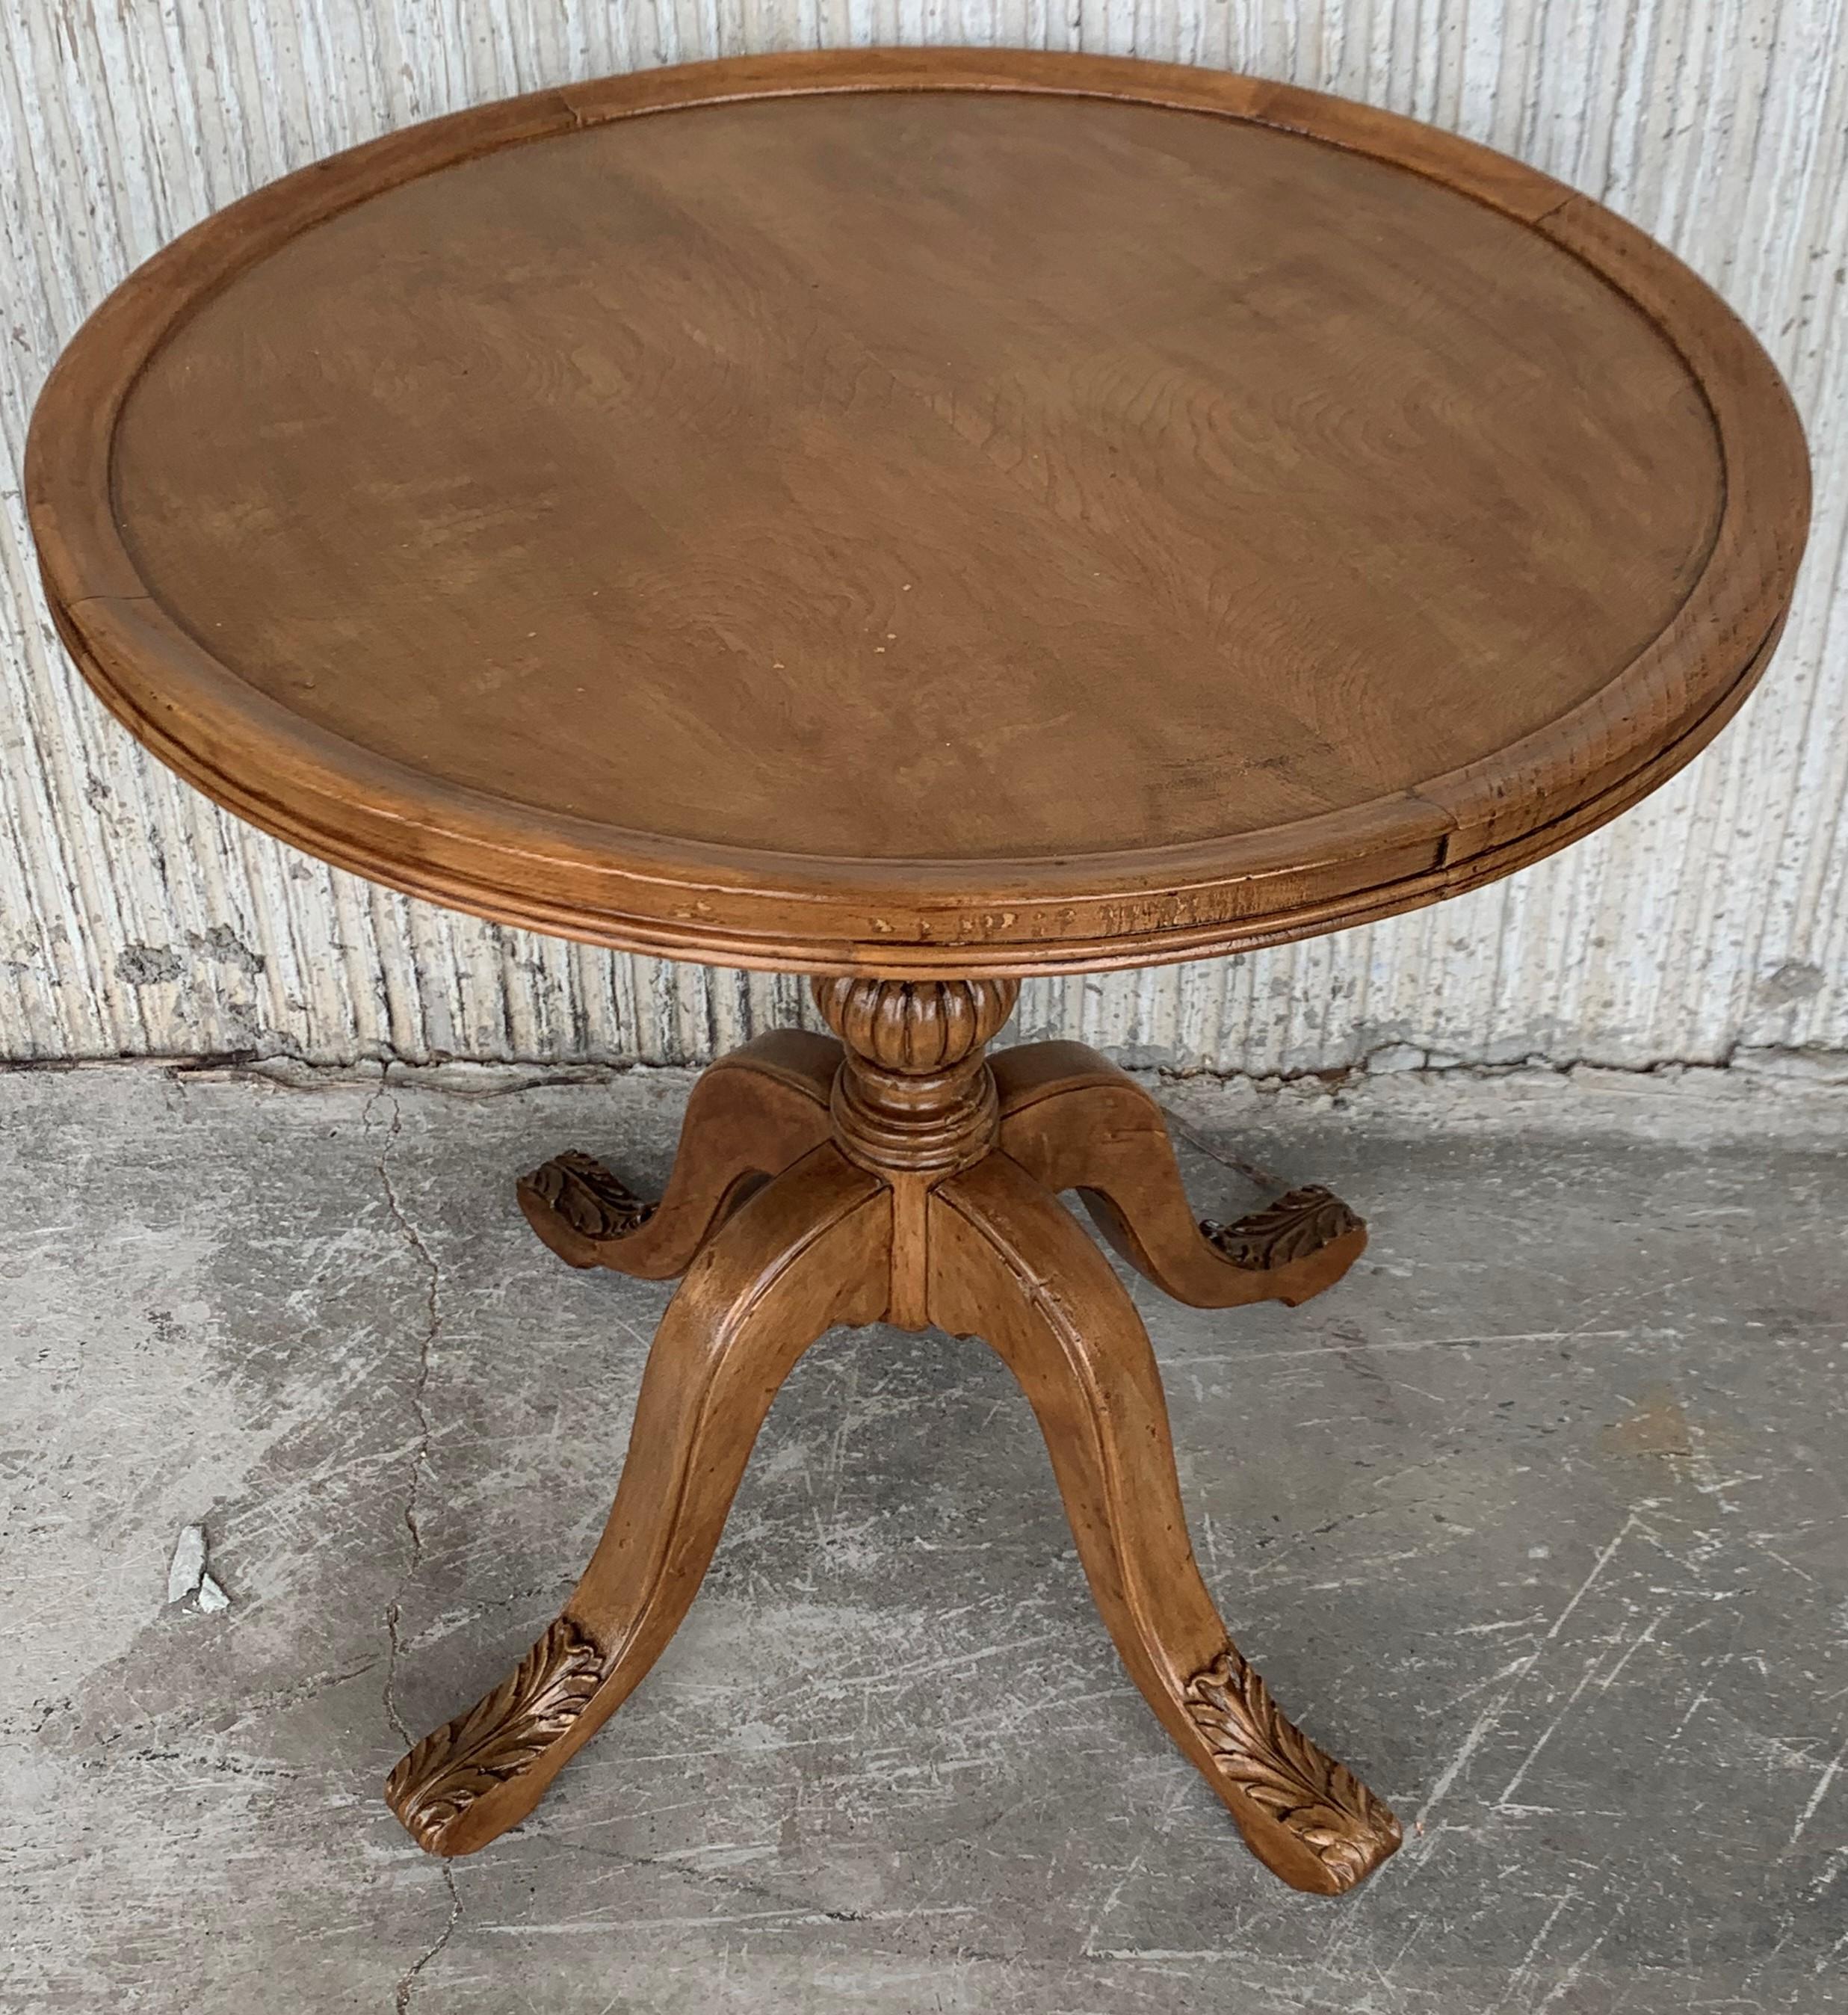 20th century English pedestal walnut round coffee or side table with ornamental carved legs.